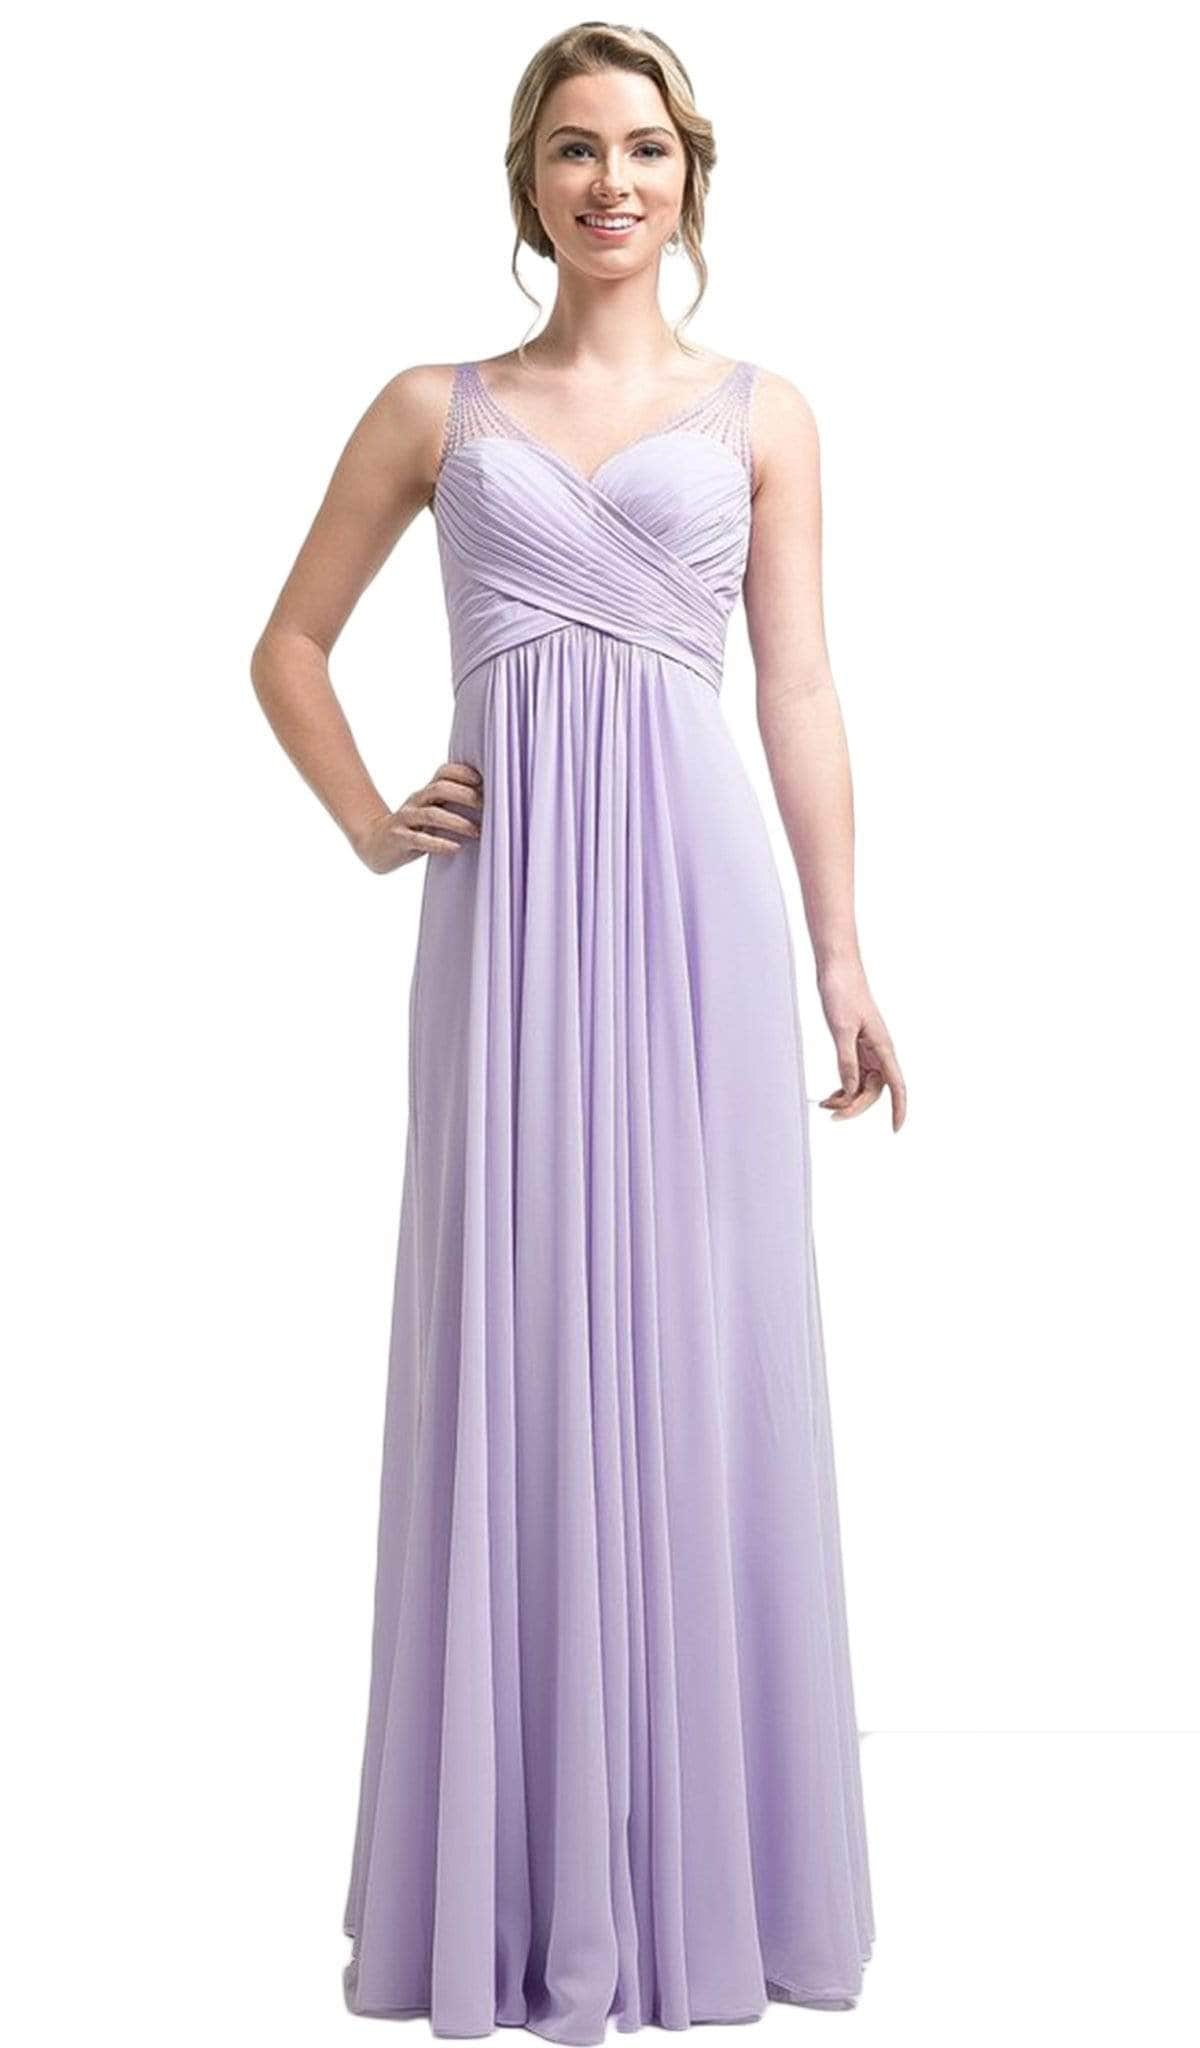 Image of Ladivine CJ214 - Strapless Crisscrossed Bodice A-Line Gown